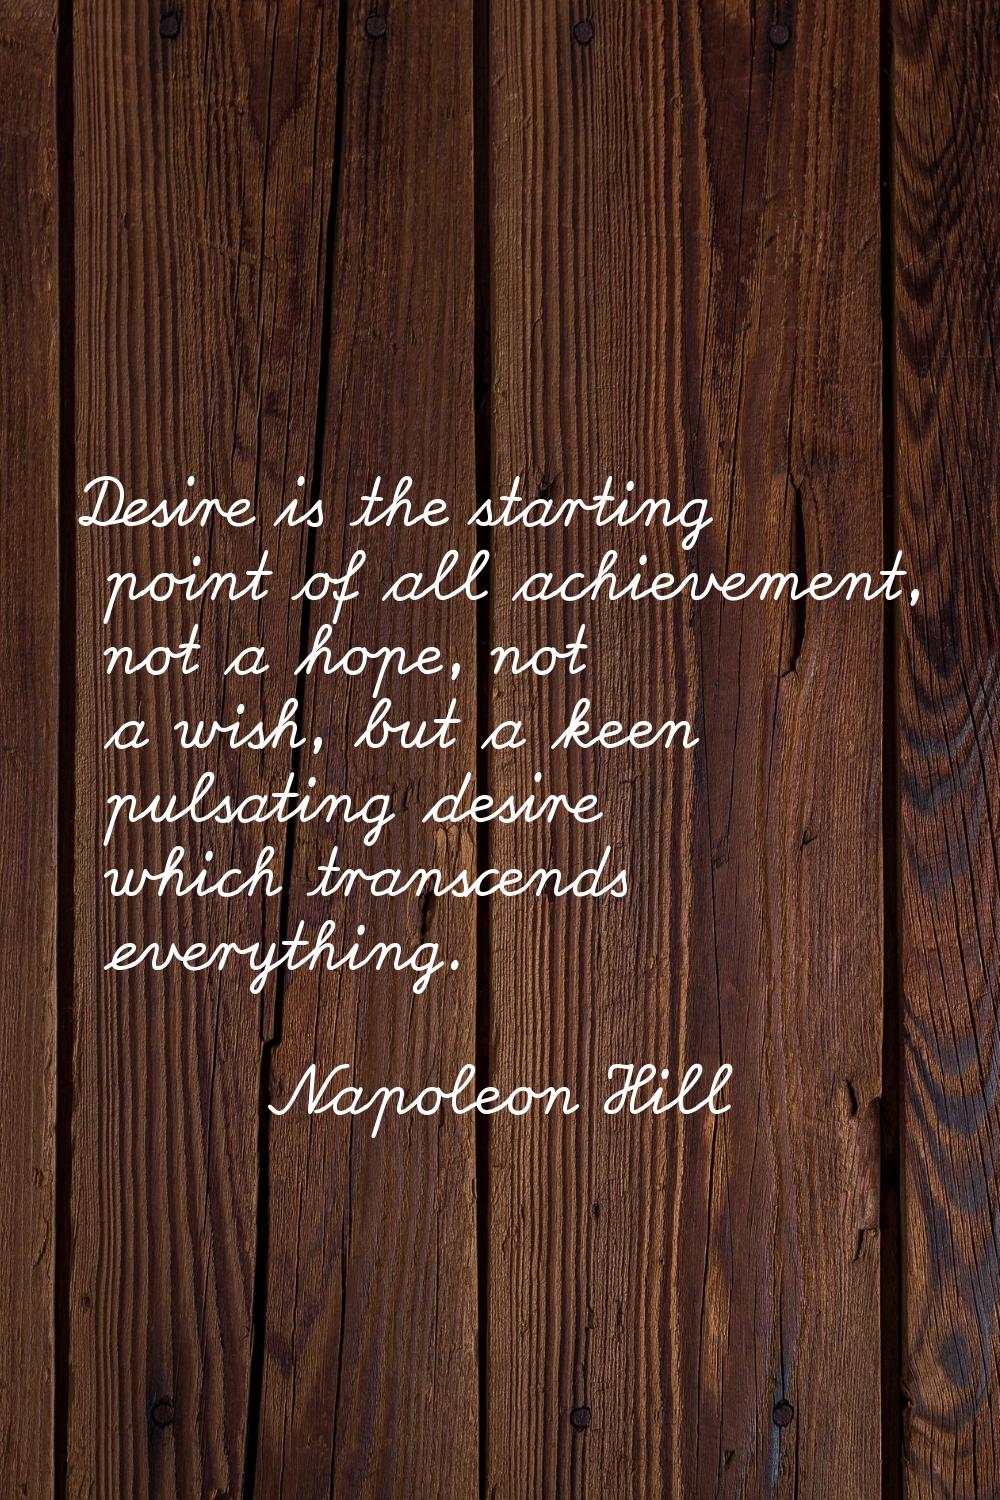 Desire is the starting point of all achievement, not a hope, not a wish, but a keen pulsating desir